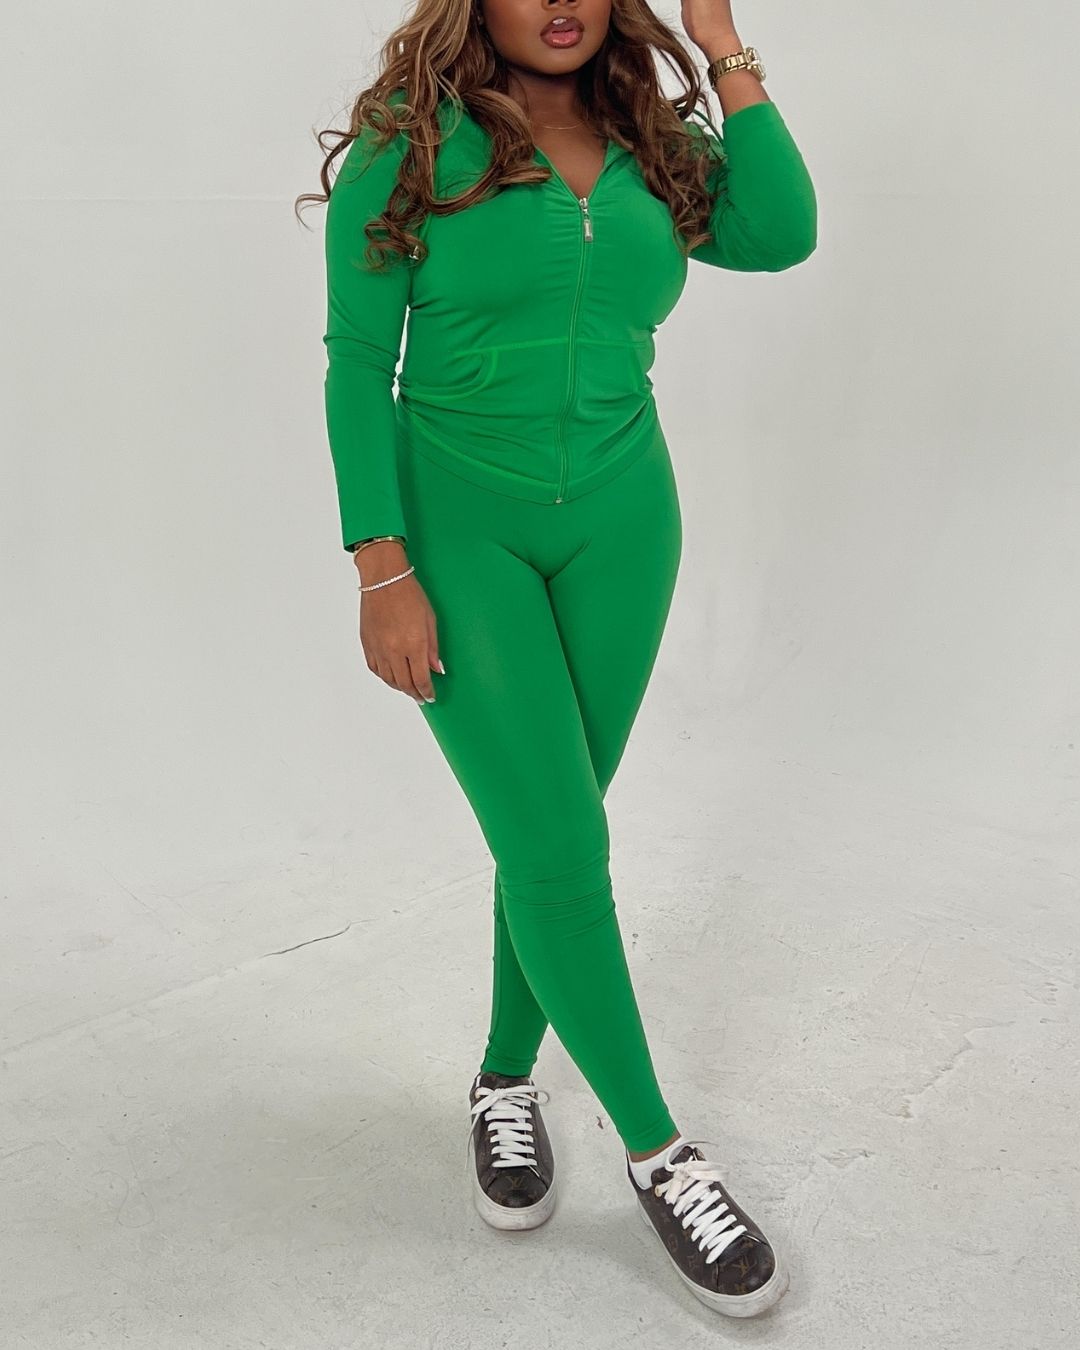 Out & About 2-Piece Legging Set (Kelly Green) - INDIVIDUAL SALE